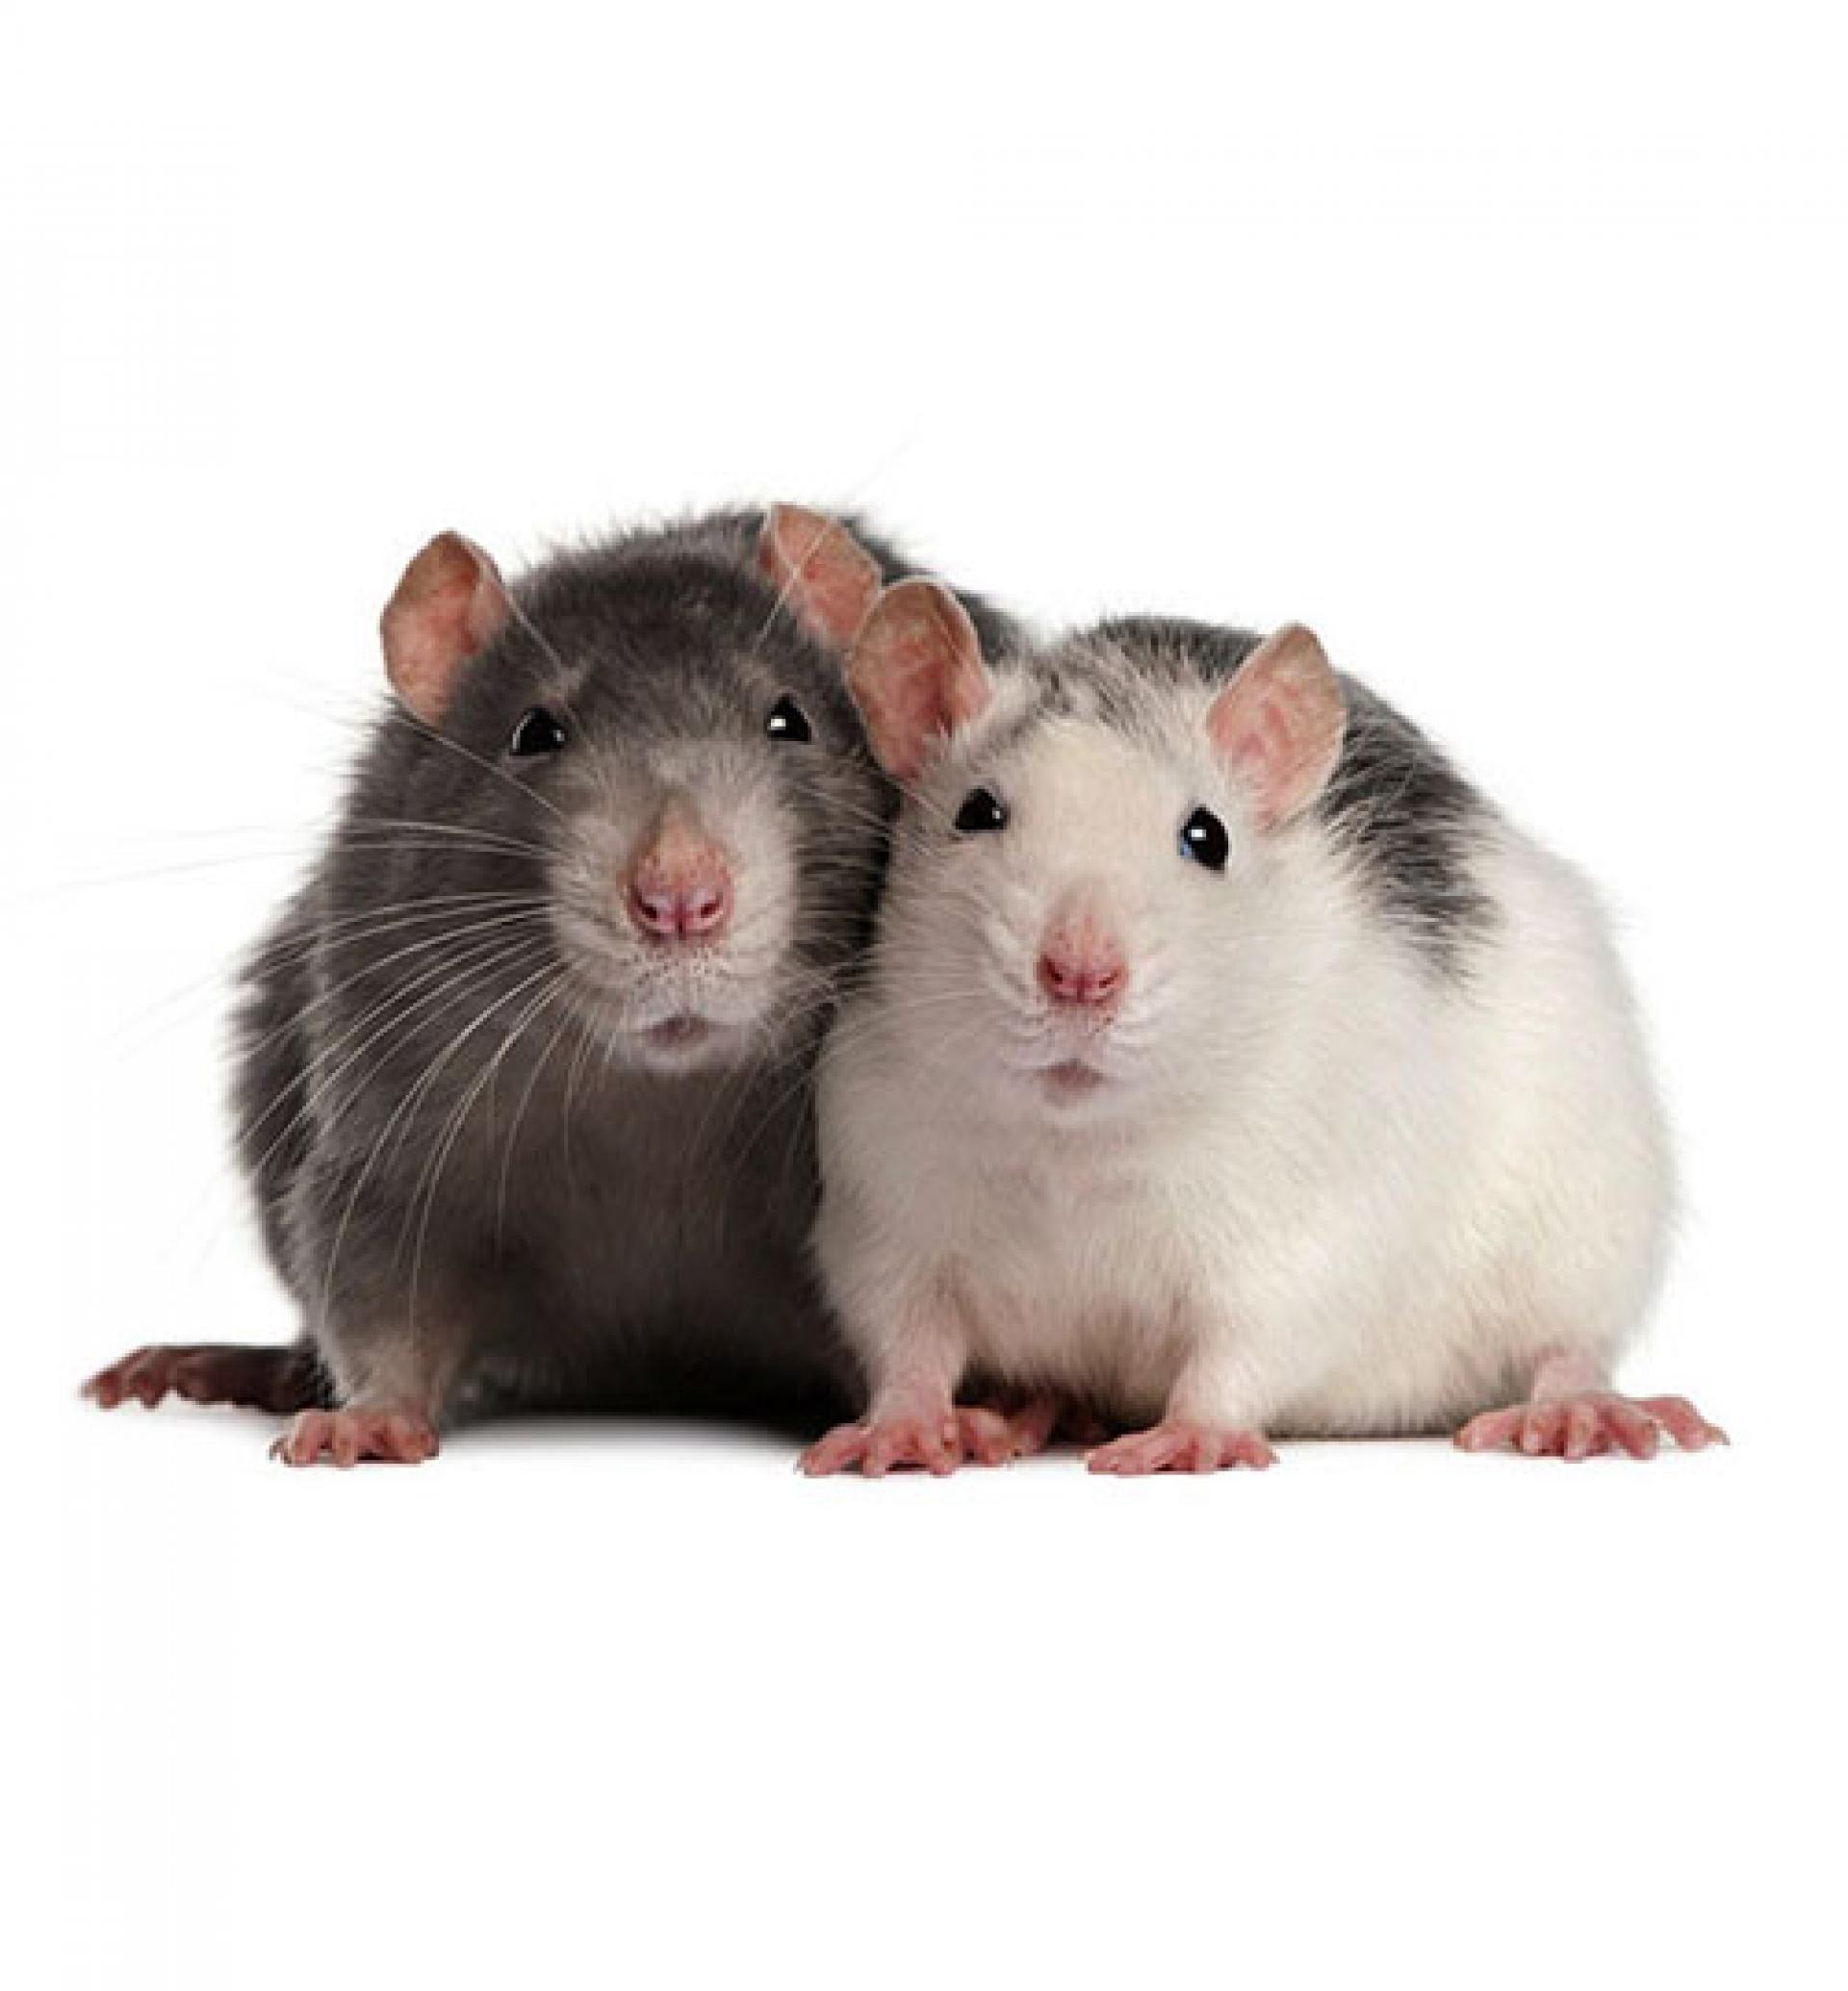 Image of Rodents